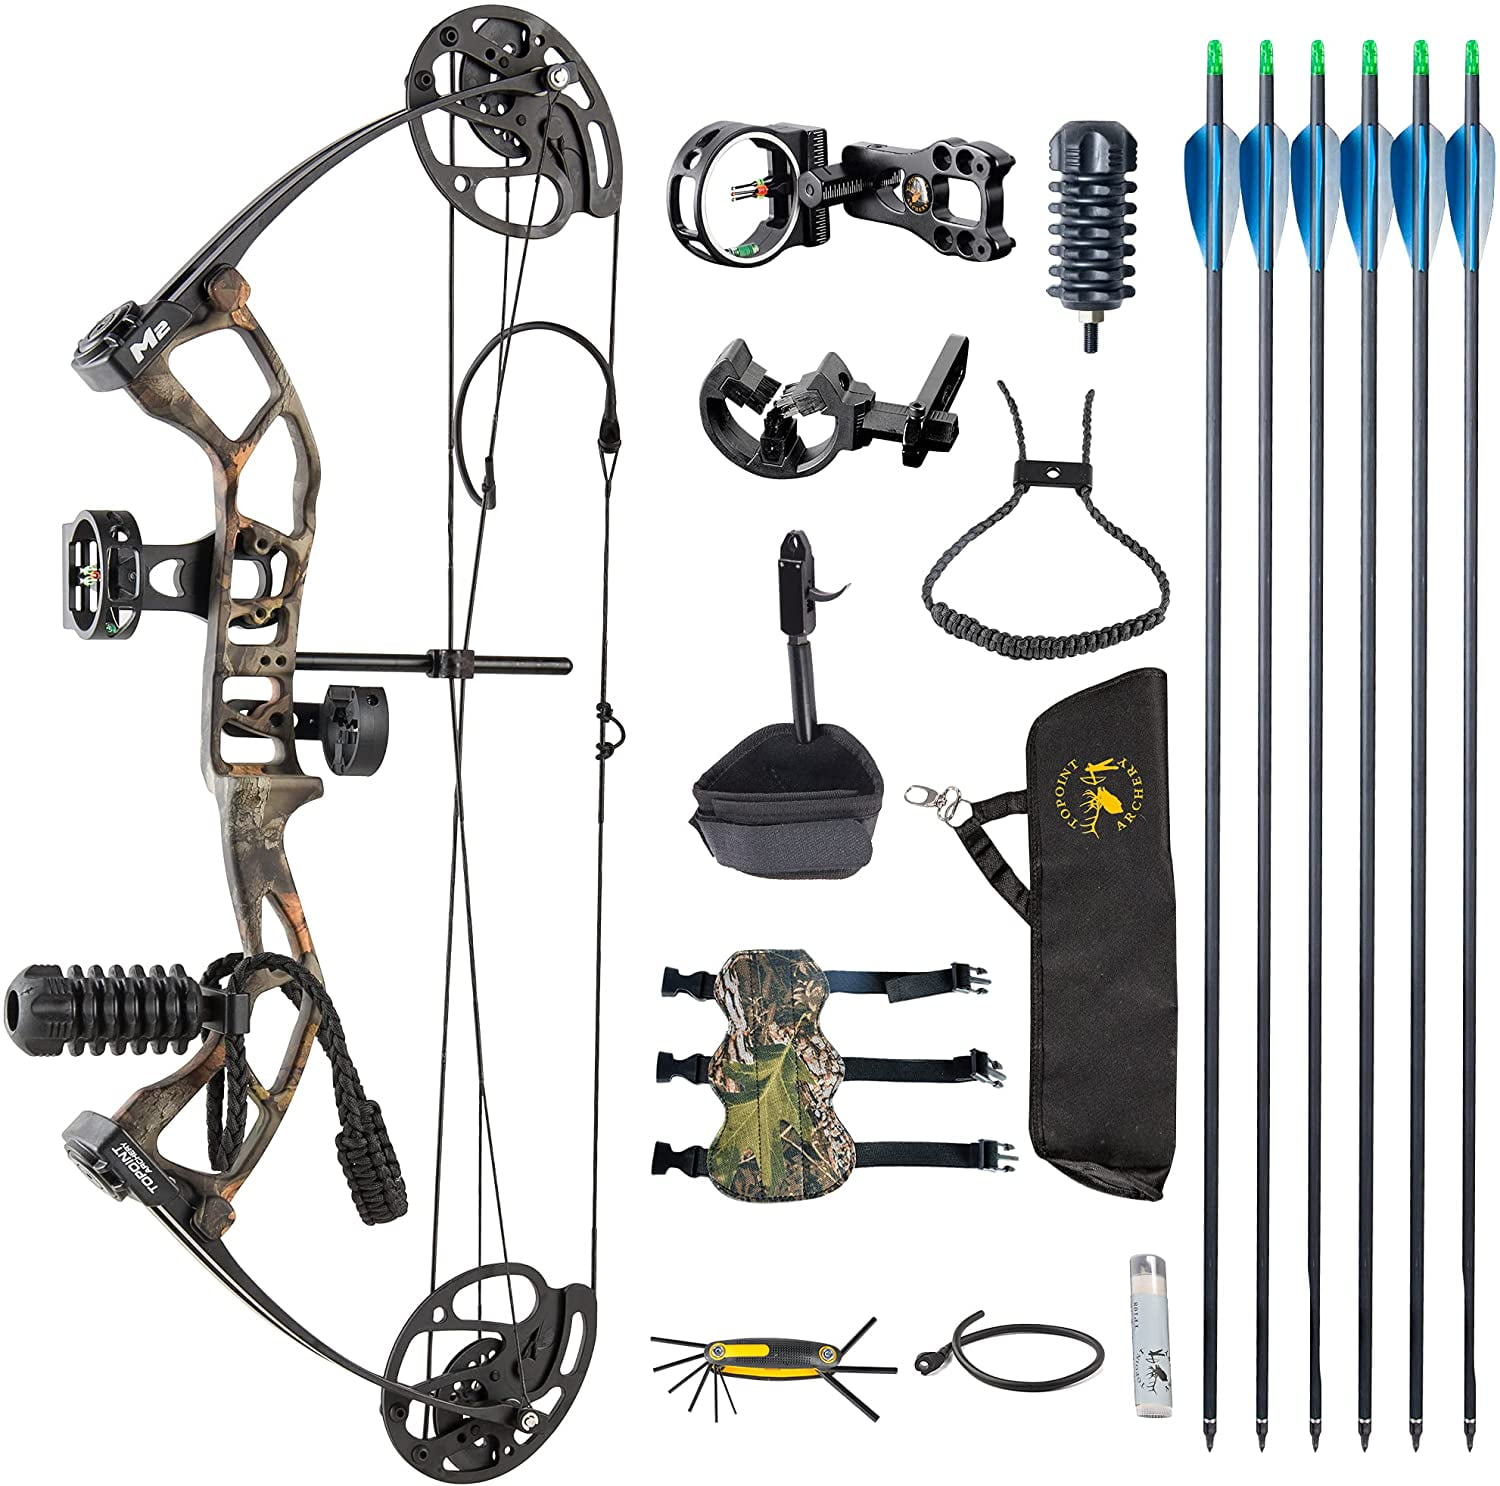 Topoint M2 Youth Archery Compound Bow Package 10-40 lbs 17-27" 